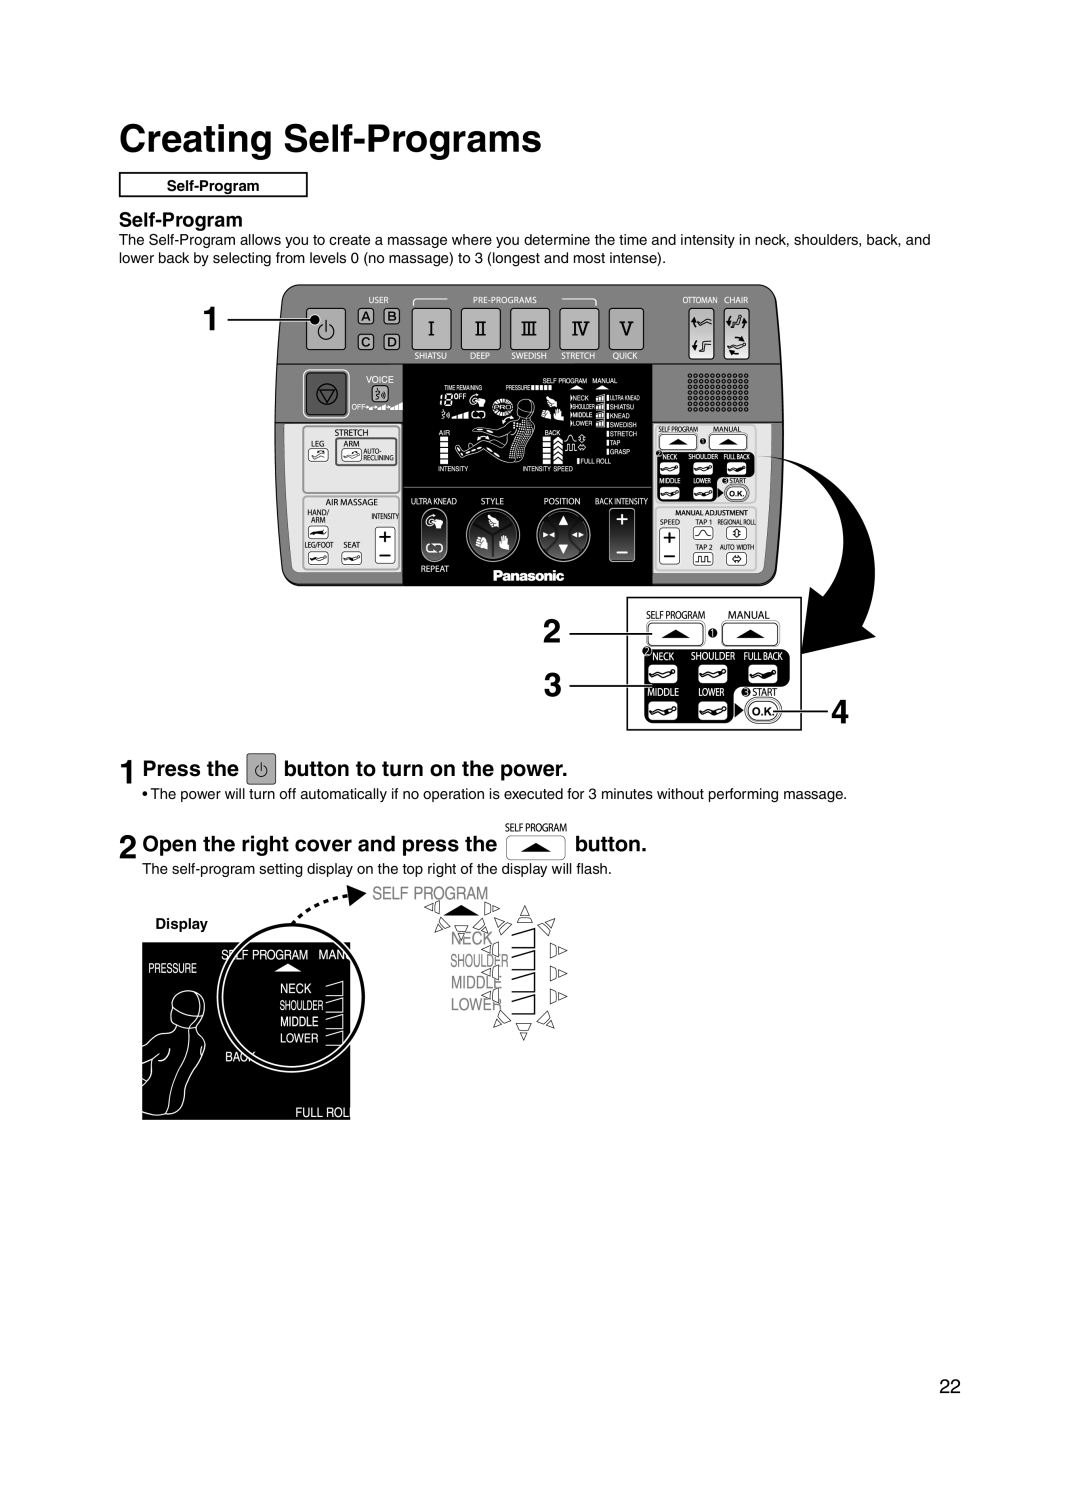 Panasonic EP30004 Creating Self-Programs, Open the right cover and press the button, Press the button to turn on the power 